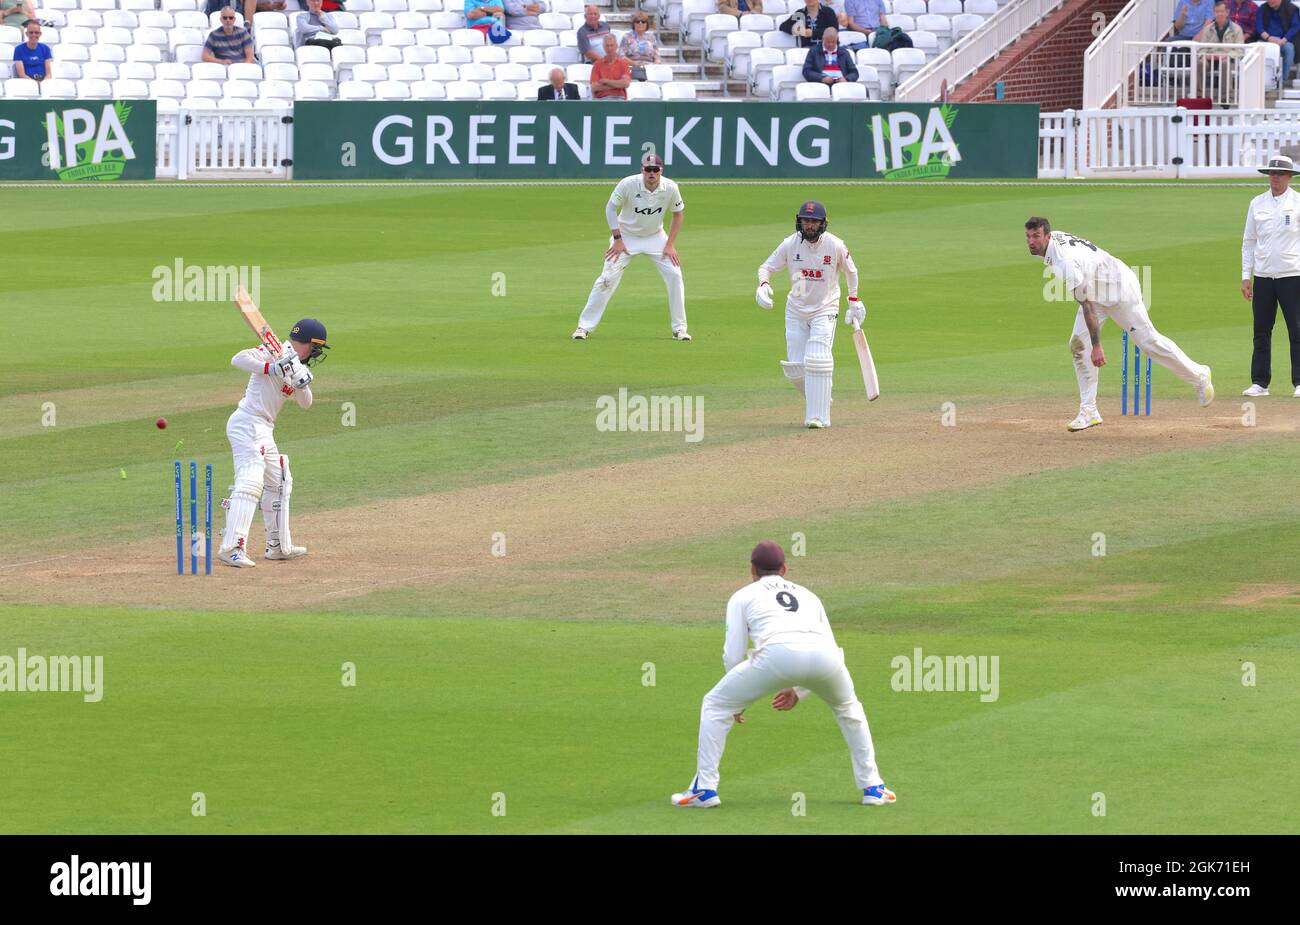 13 September 2021. London, UK. Adam Wheater of Essex is bowled by Reece Topley as Surrey take on Essex in the County Championship at the Kia Oval, day two. David Rowe/Alamy Live News Stock Photo